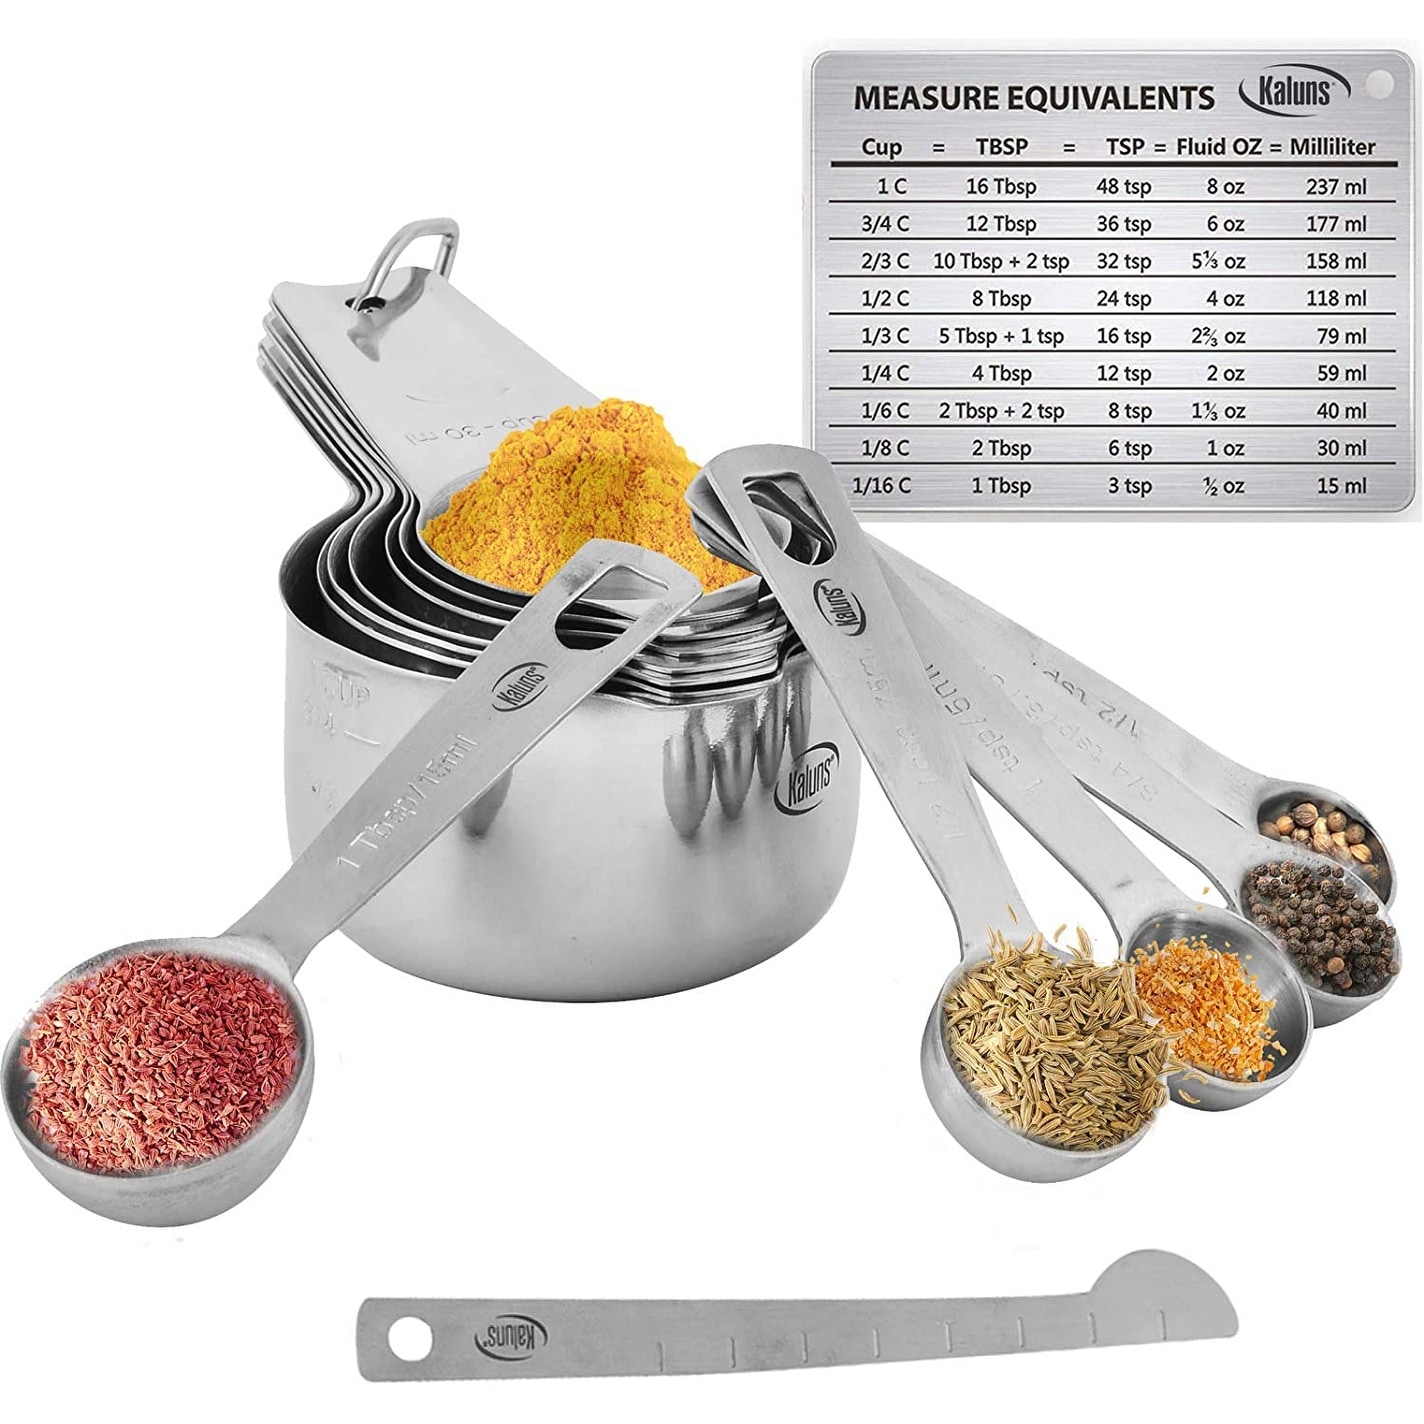 https://ak1.ostkcdn.com/images/products/is/images/direct/f77ab99432a791ebfce88f8c119939a9f43c7660/Measuring-Cups-and-Spoons%2C-16-Piece-Stainless-Steel.jpg